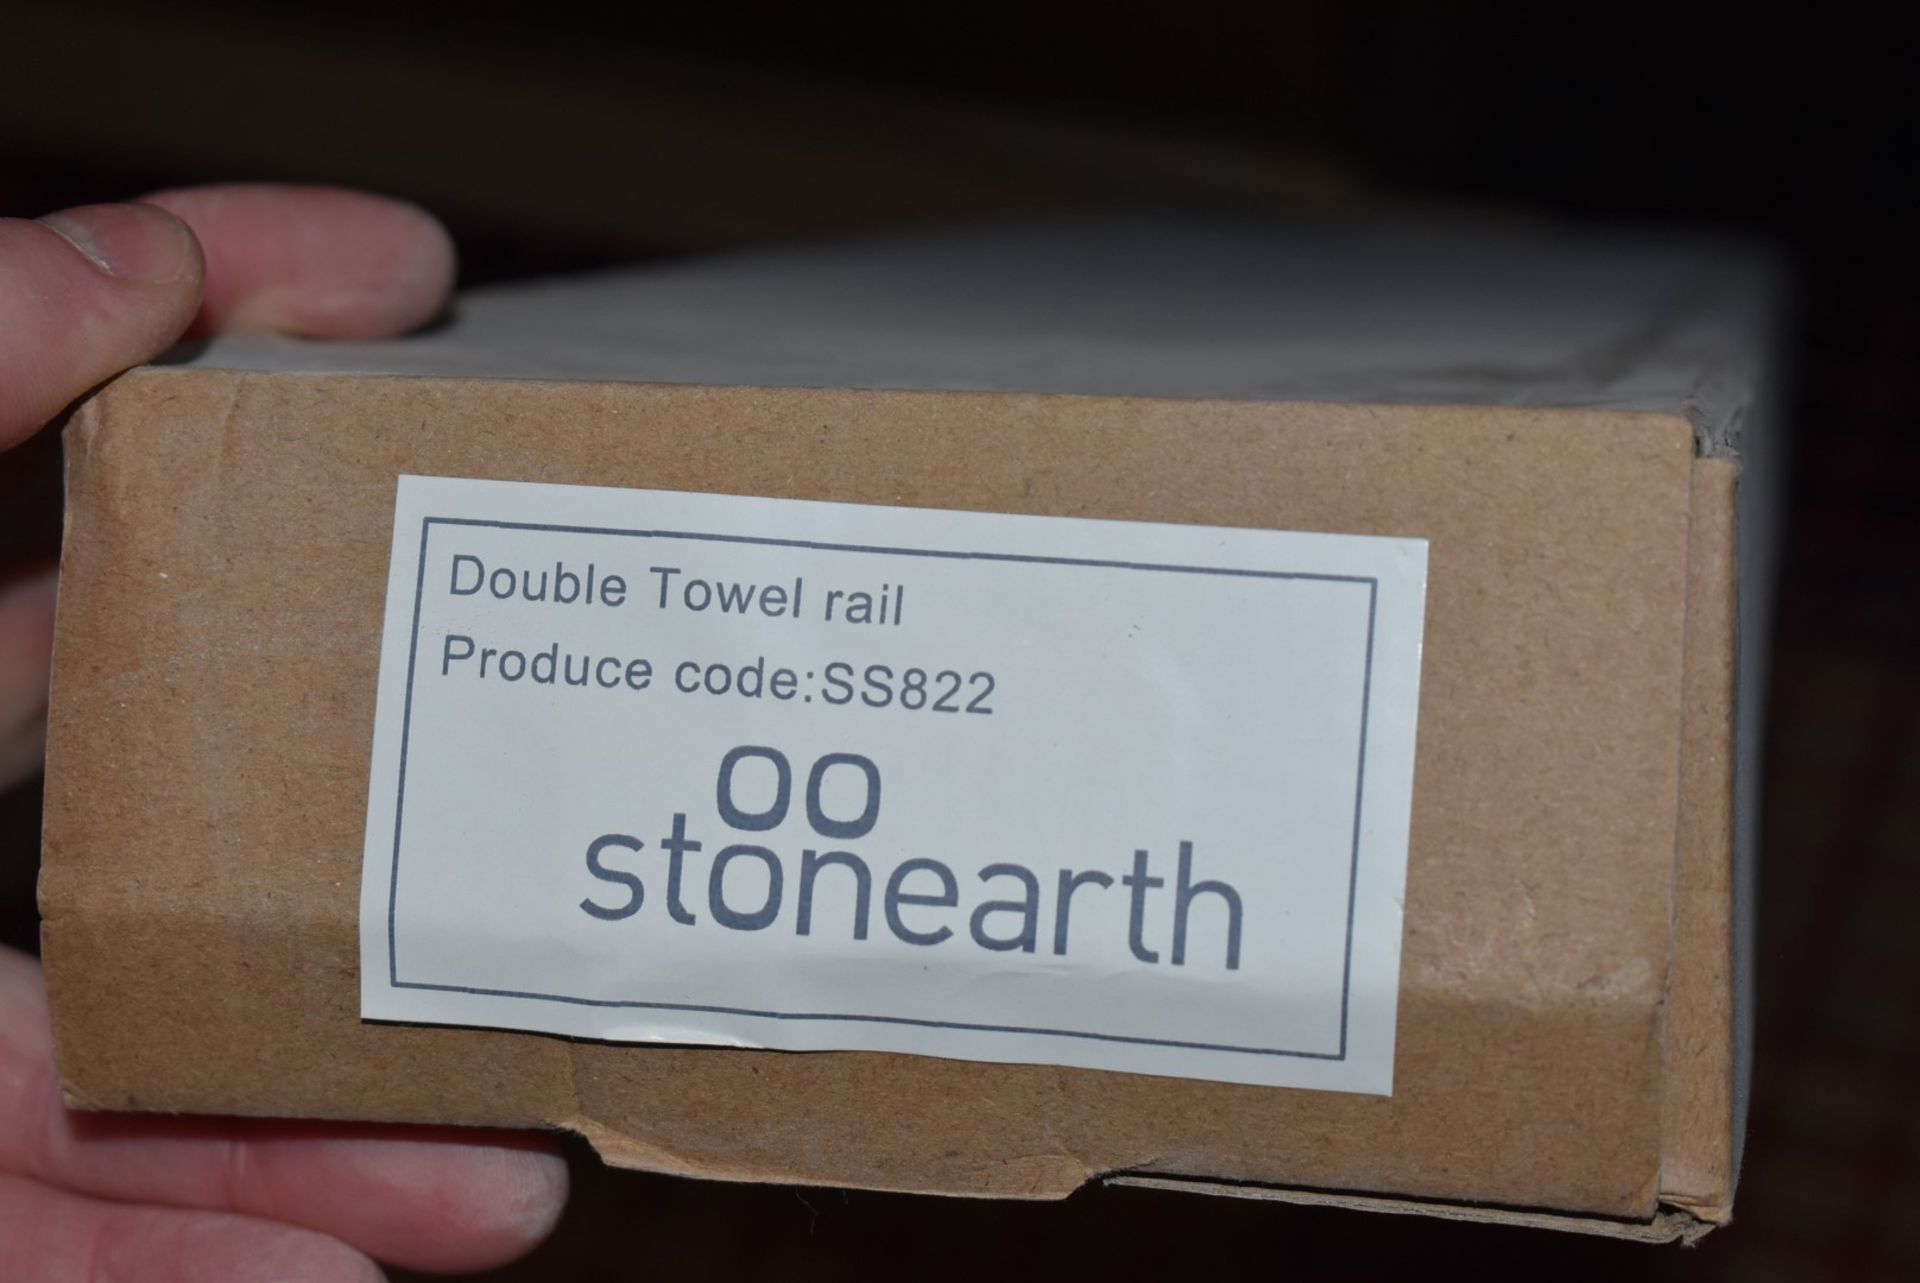 1 x Stonearth Double Towel Rack Rail - Solid Stainless Steel Bathroom Accessory - Brand New & - Image 3 of 3